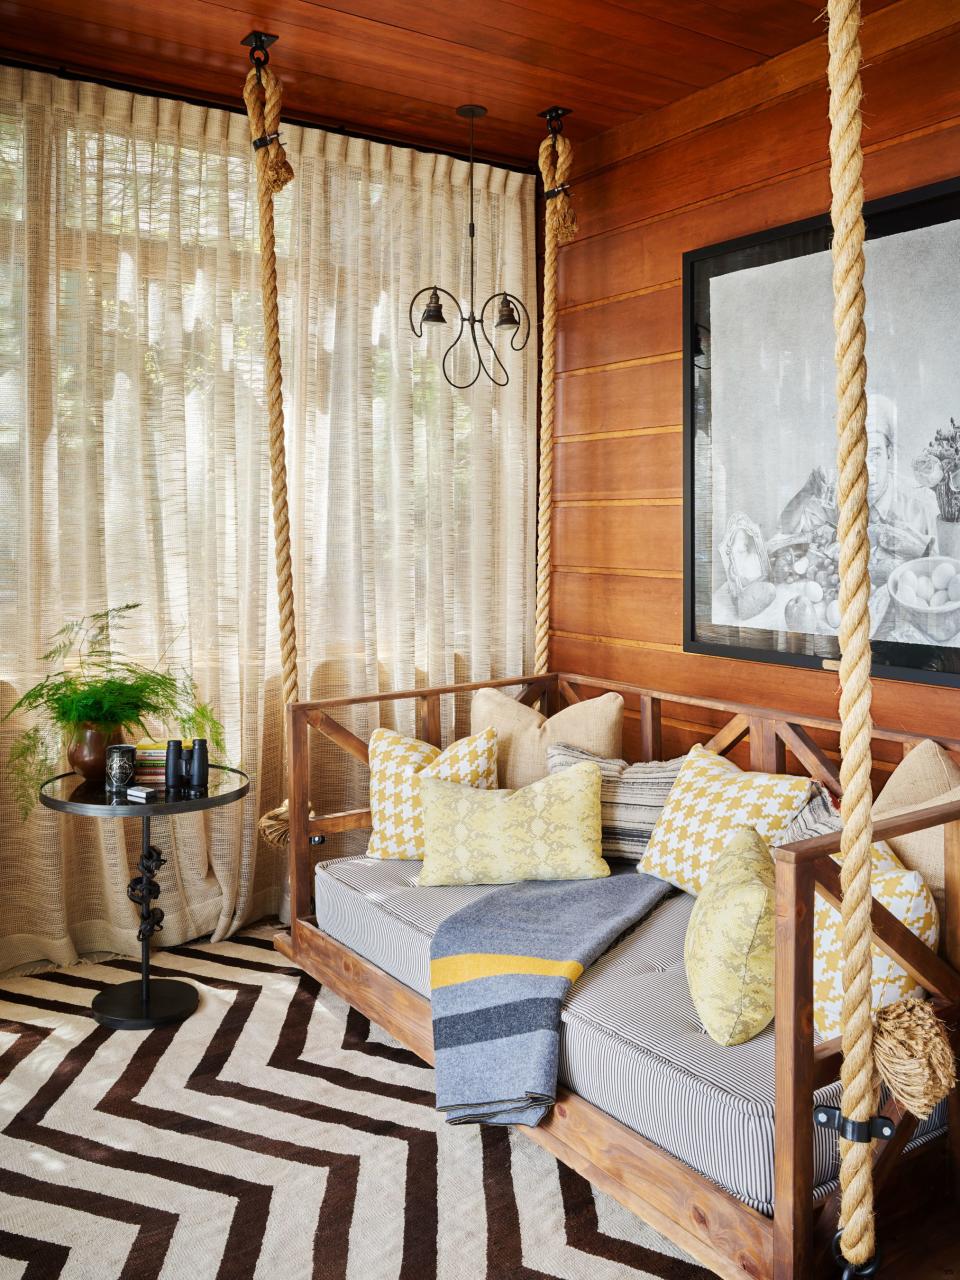 The sunroom features a suspended daybed by Robert Buckley. Cushion wears a Perennials stripe; curtains of an Opuzen sheer; Ethan Murrow drawing; Krimsa rug.